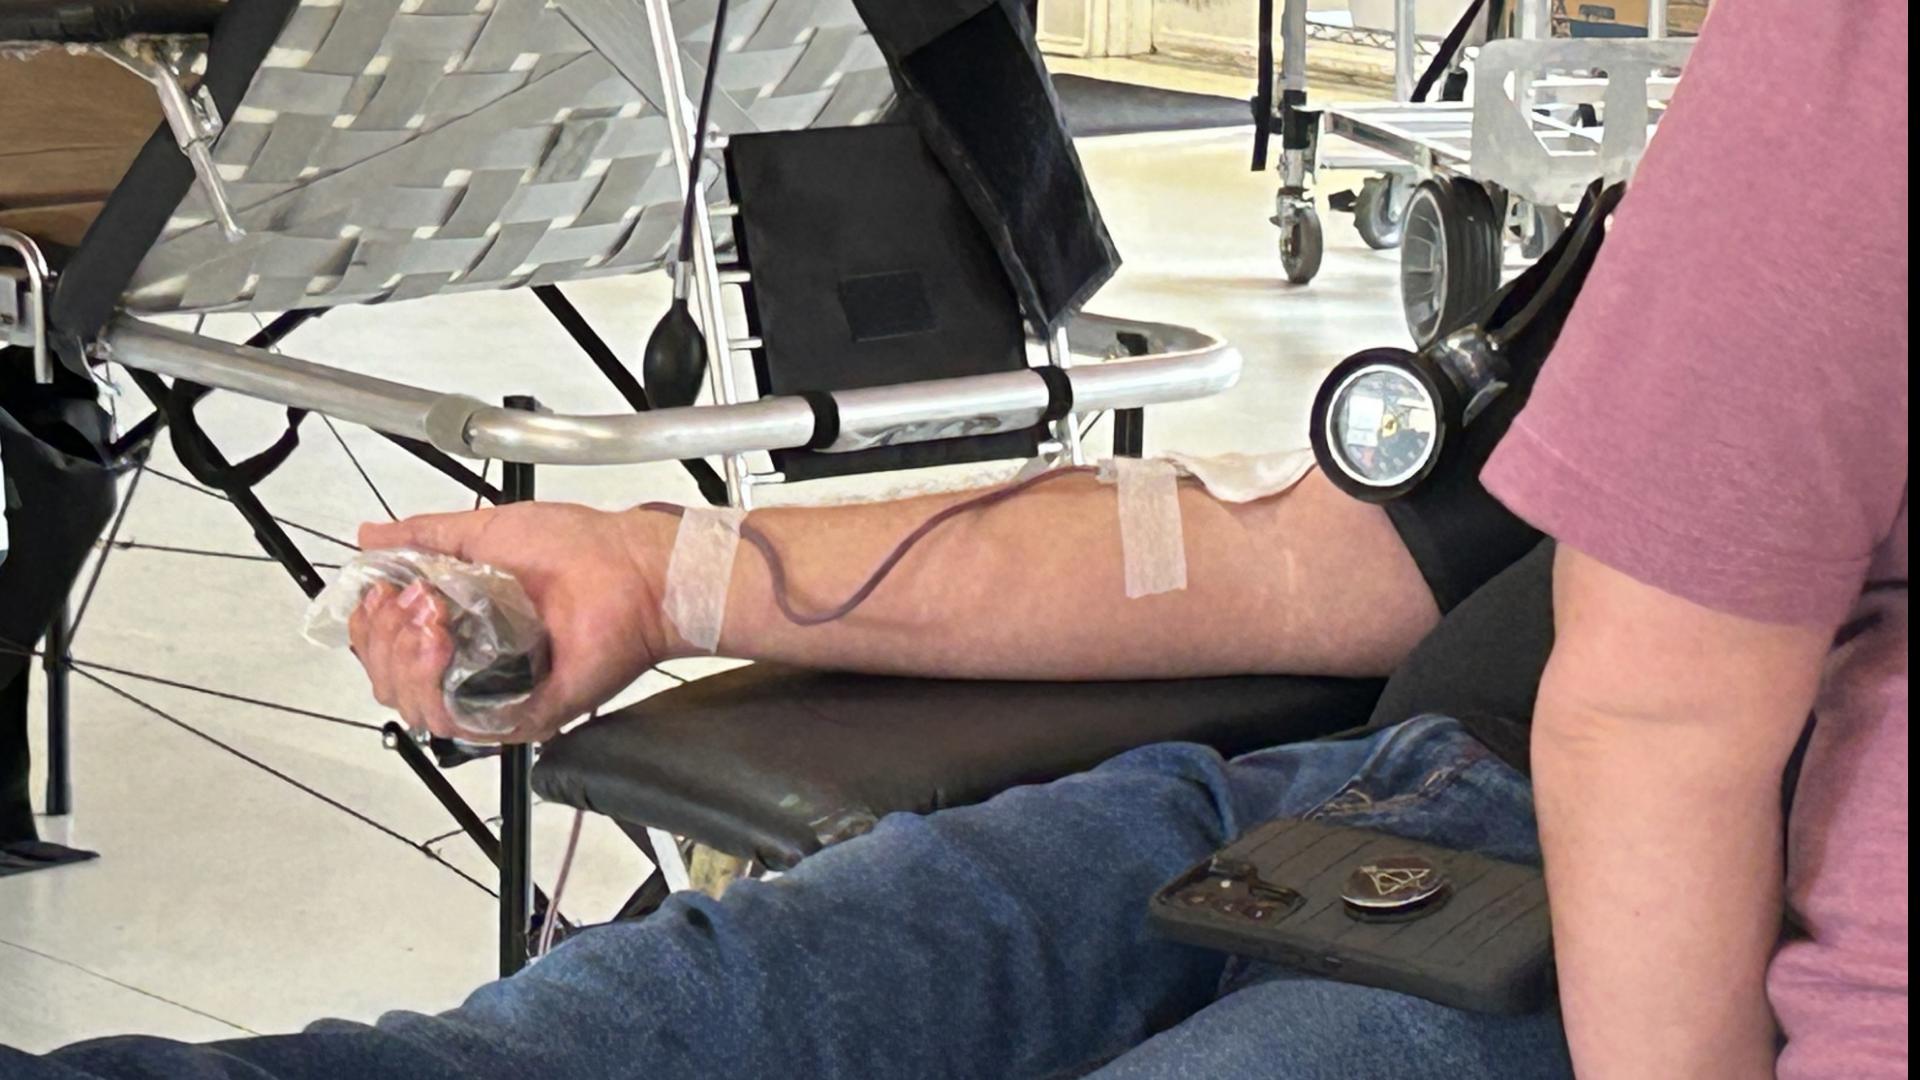 Over 40 people signed up to donate blood, and even more showed up.